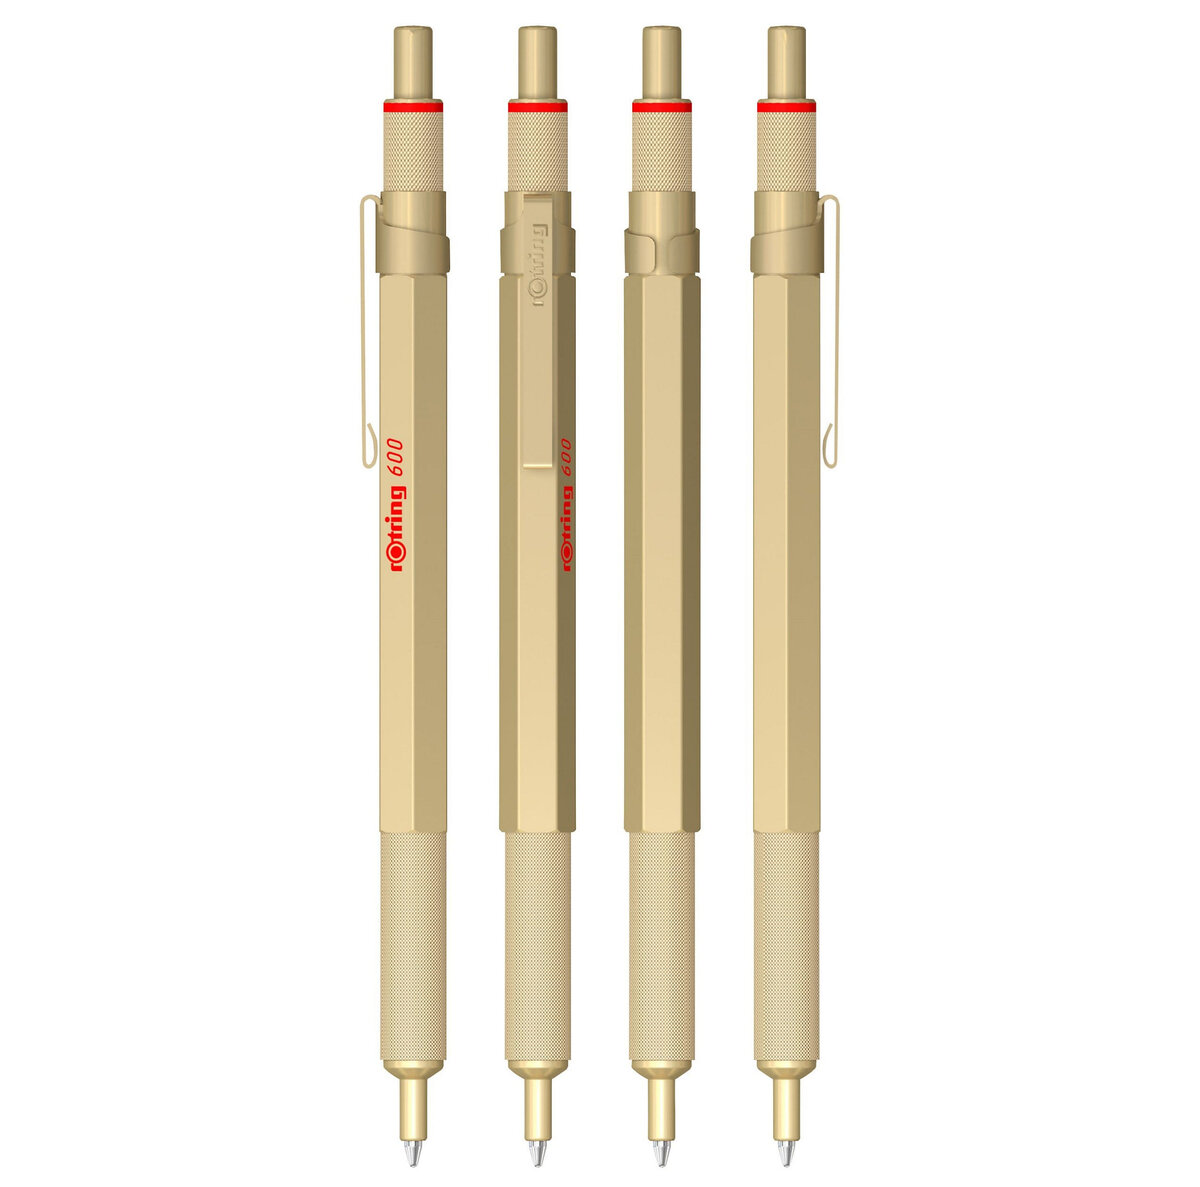 Rotring 600 - stylo-bille rechargeable - pointe moyenne (1mm) - Schleiper -  Catalogue online complet